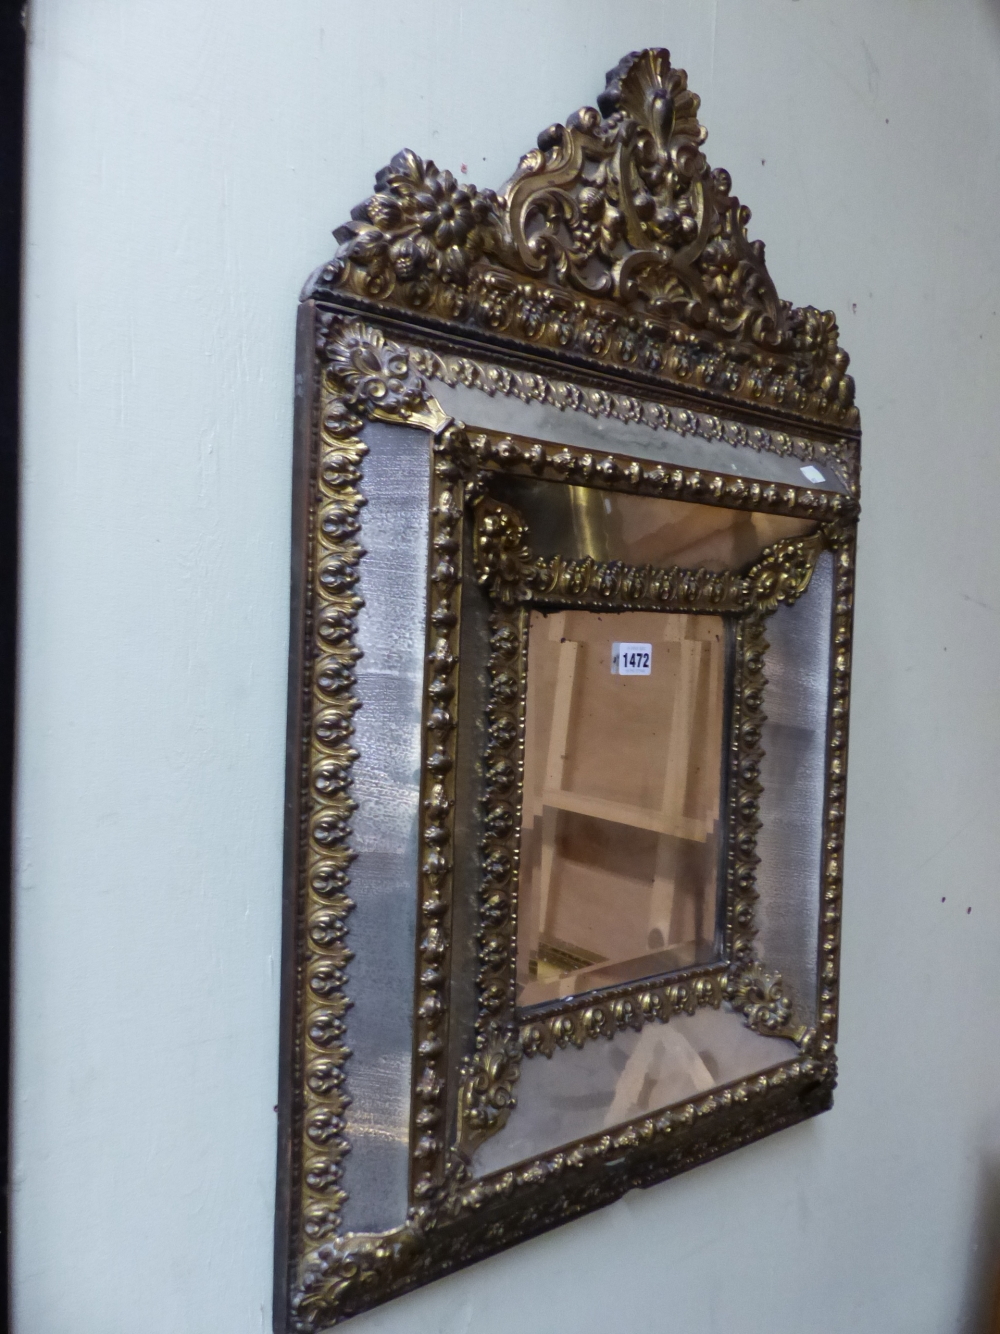 A DUTCH BAROQUE STYLE BRASS MOUNTED MULTIPLE PLATE MIRROR CRESTED BY FRUIT, FLOWERS AND SCROLLING - Image 5 of 6